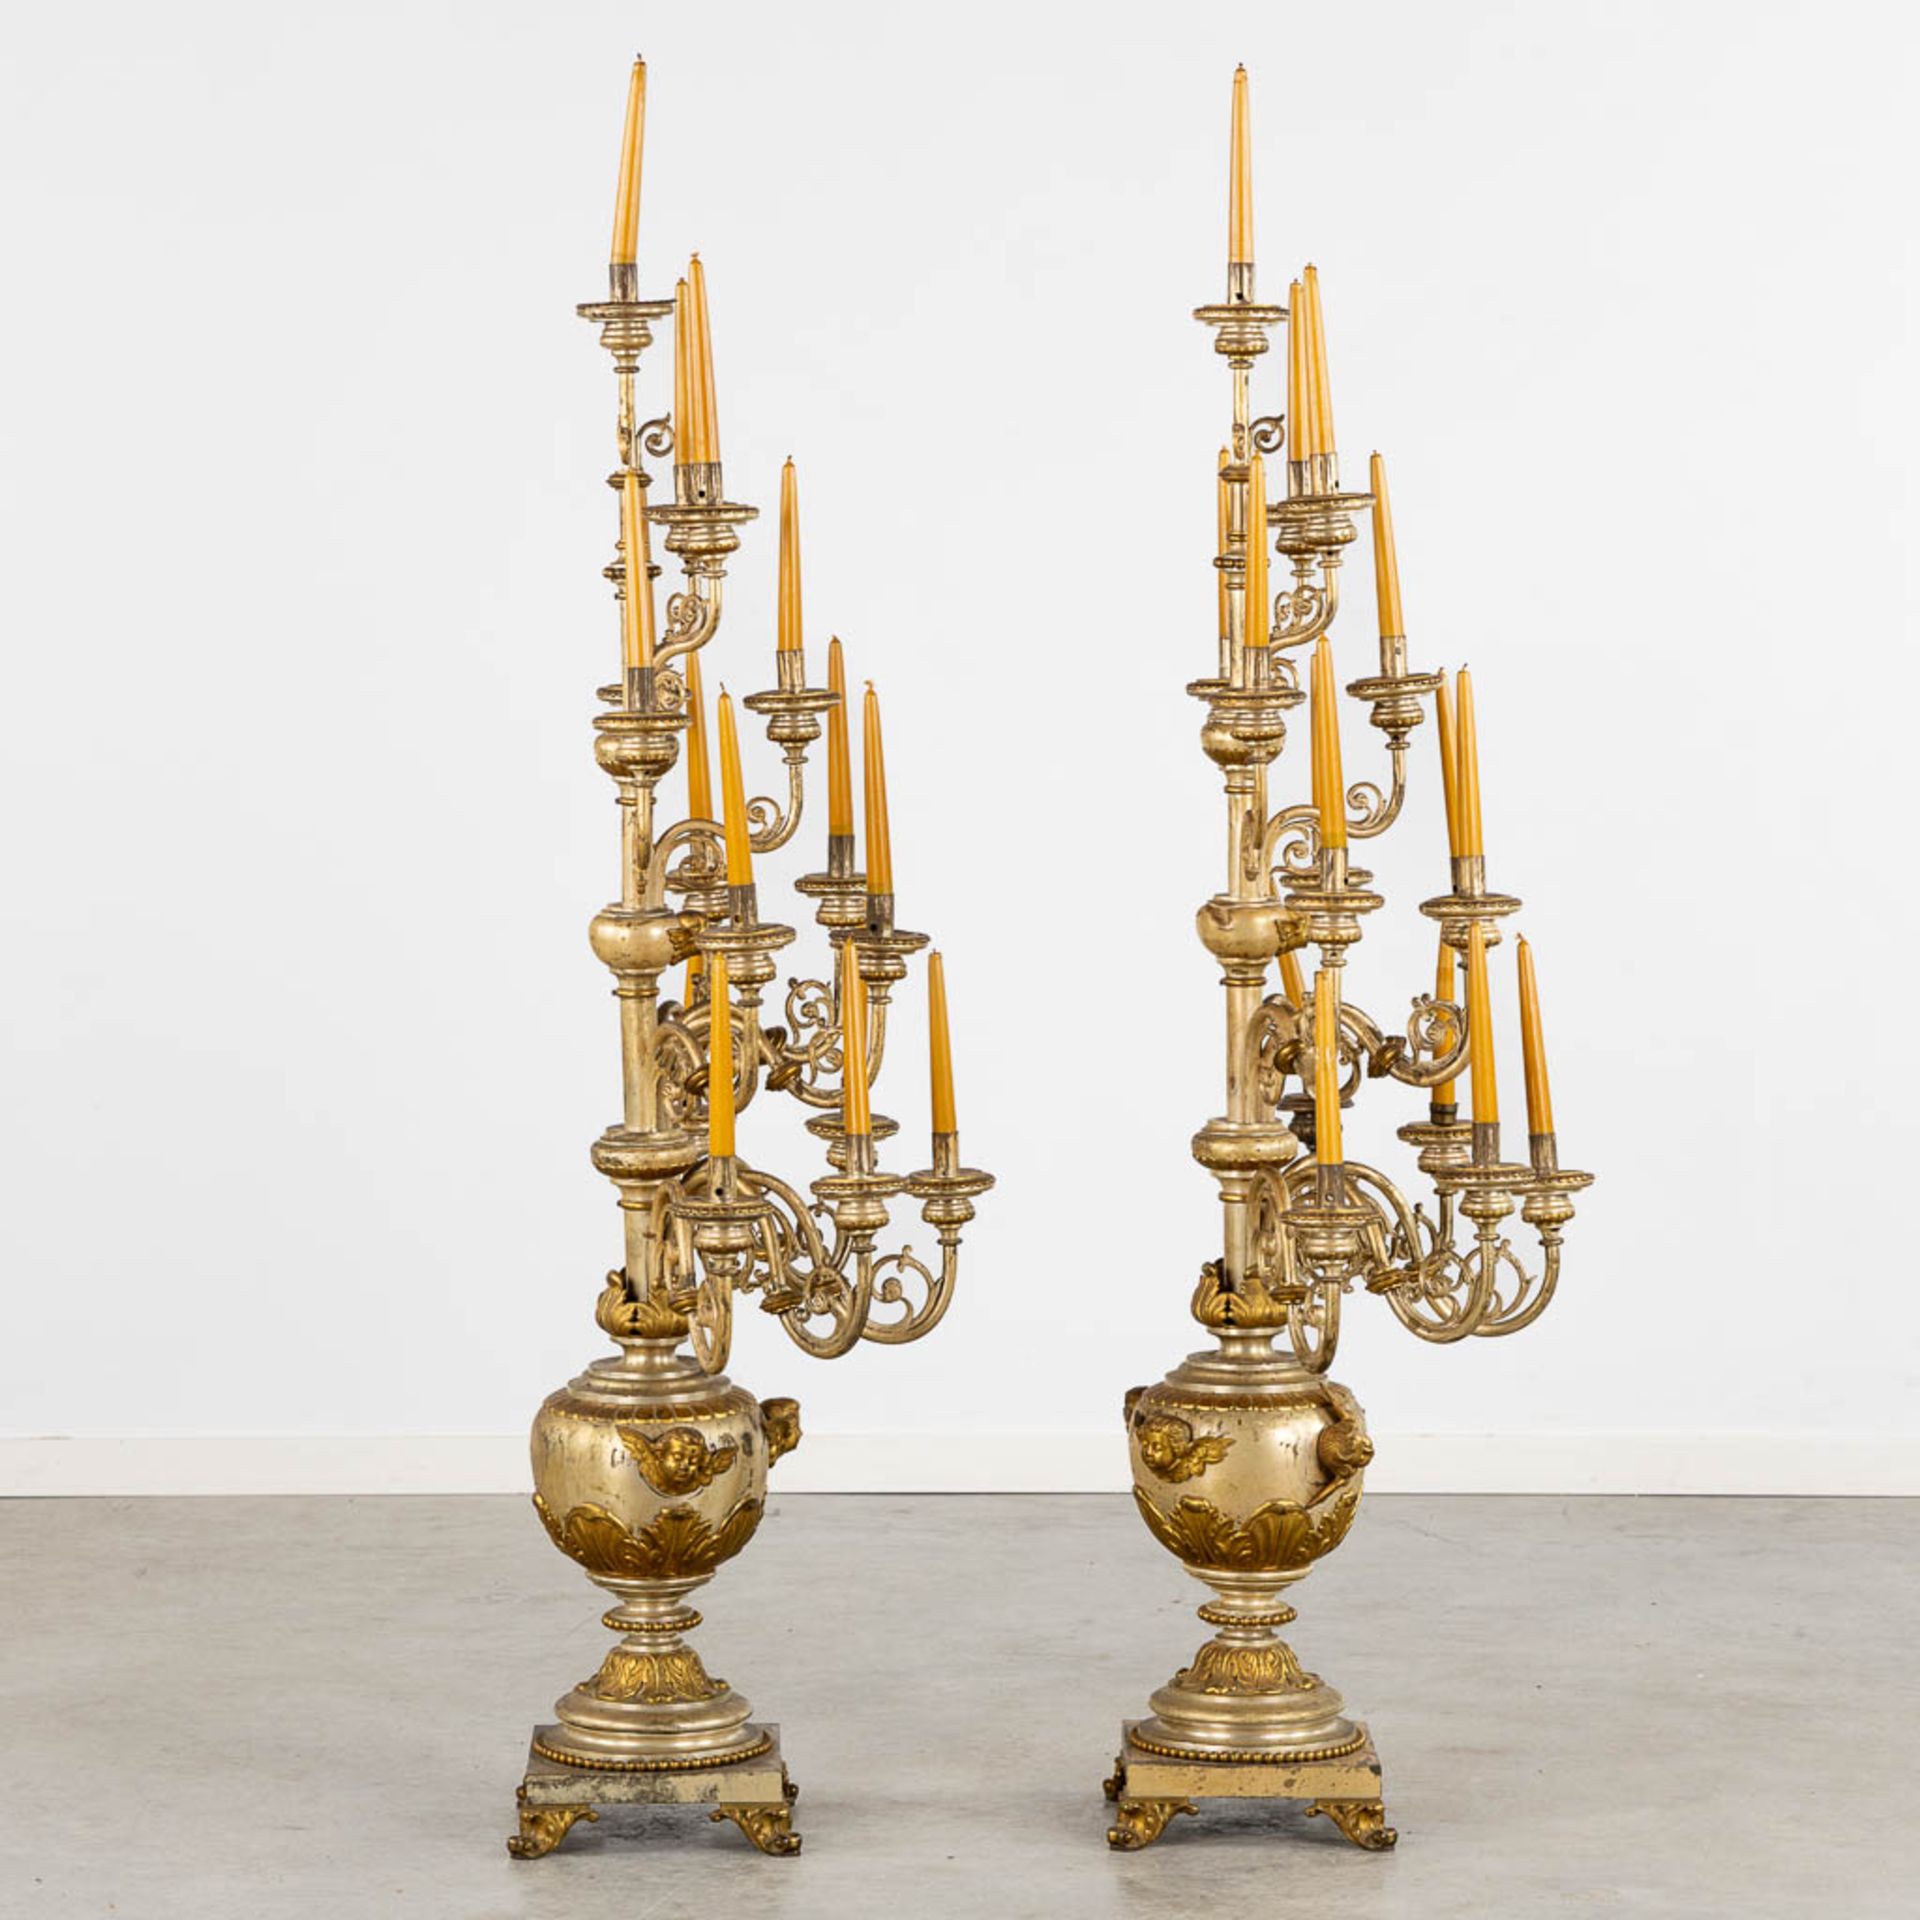 An impressive pair of candelabra, 15 candles, gold and silver-plated metal. (L:44 x W:60 x H:138 cm) - Bild 7 aus 12